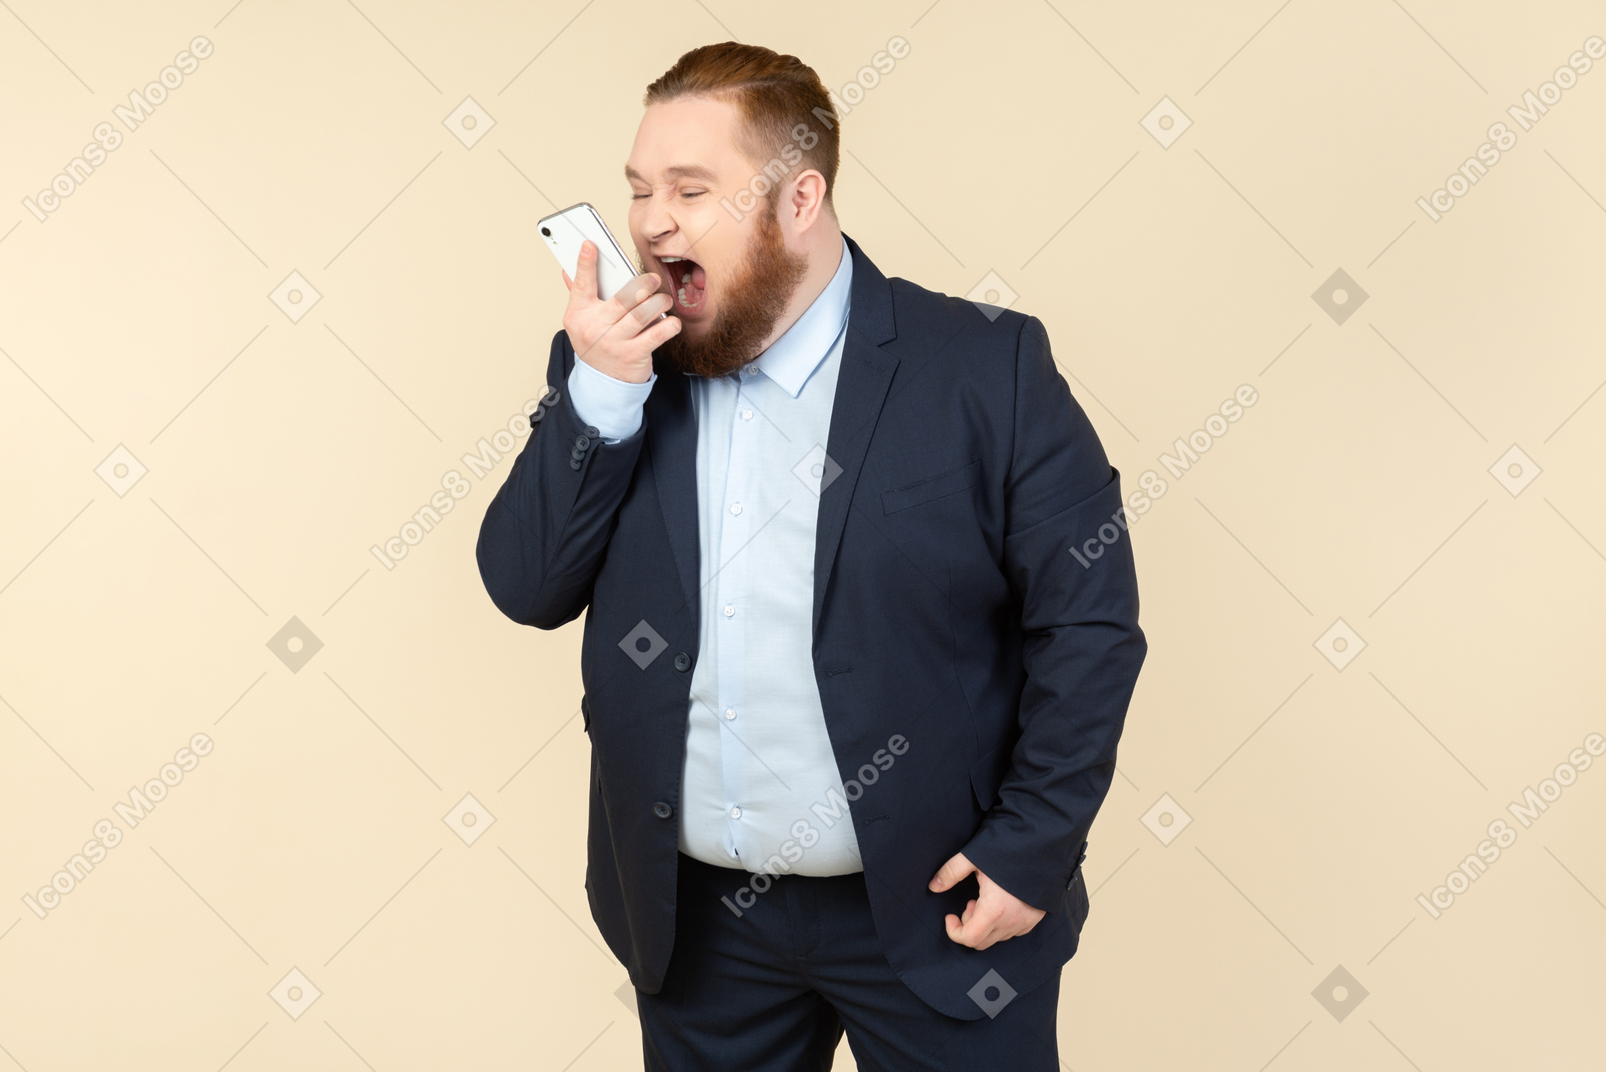 Young overweight office worker yelling at smartphone he's holding